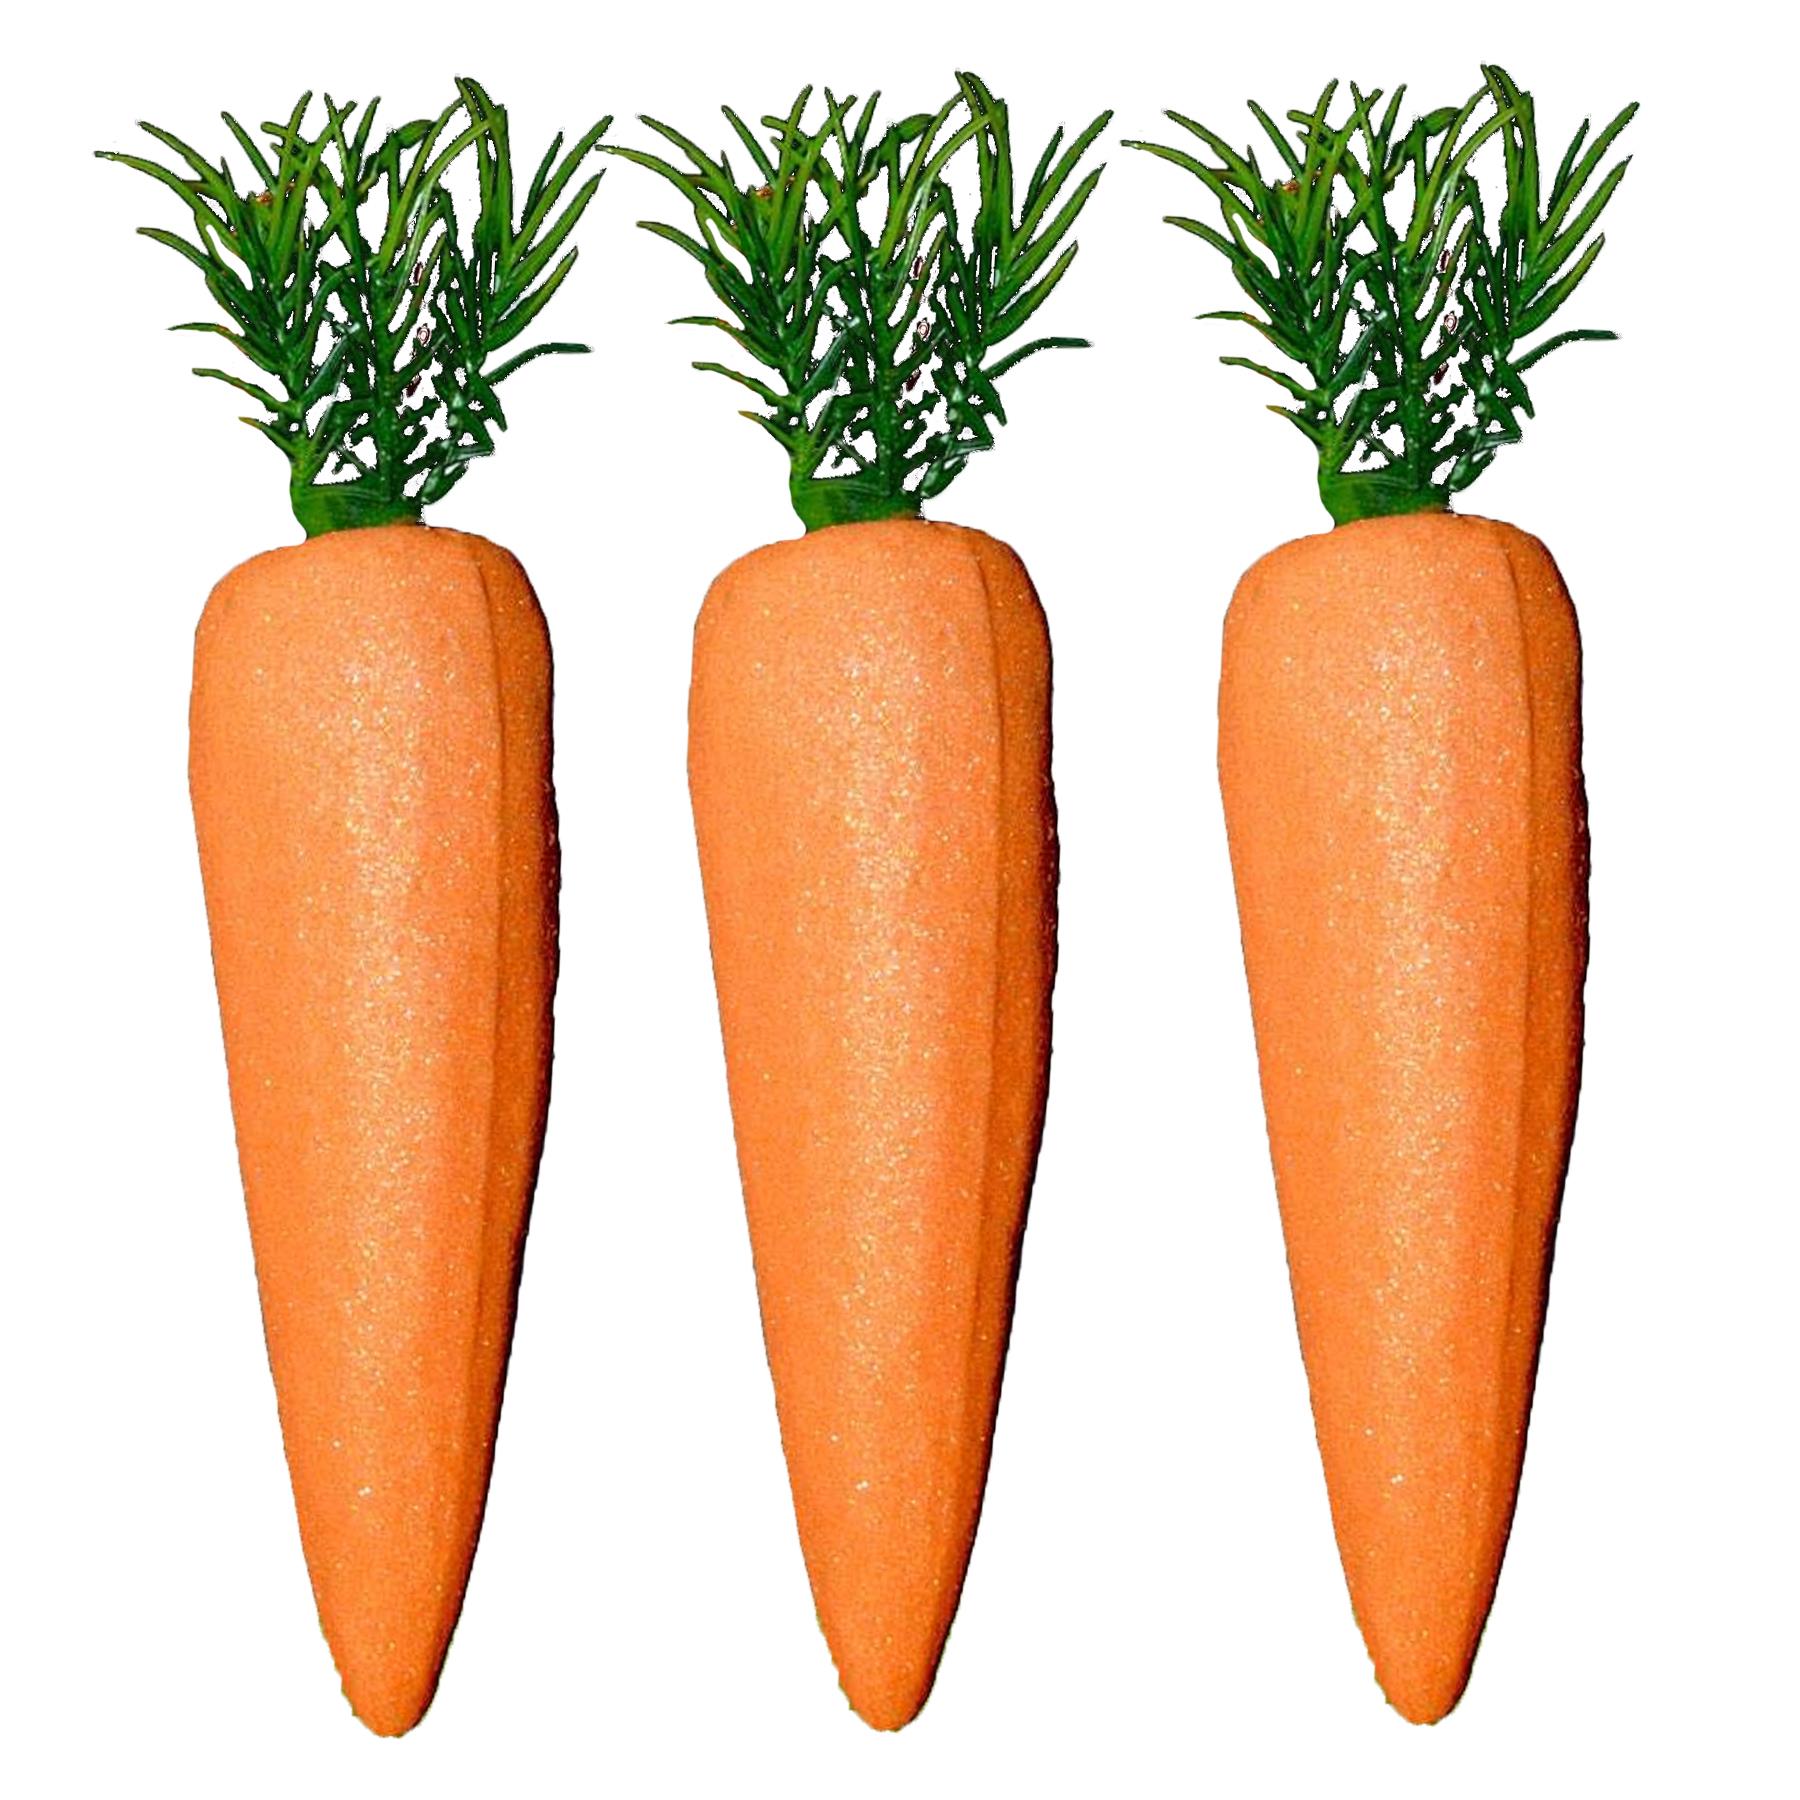 Easter Decorations, Bonnet Making, Arts and Crafts - 3 Pk Glitter Carrots 06482